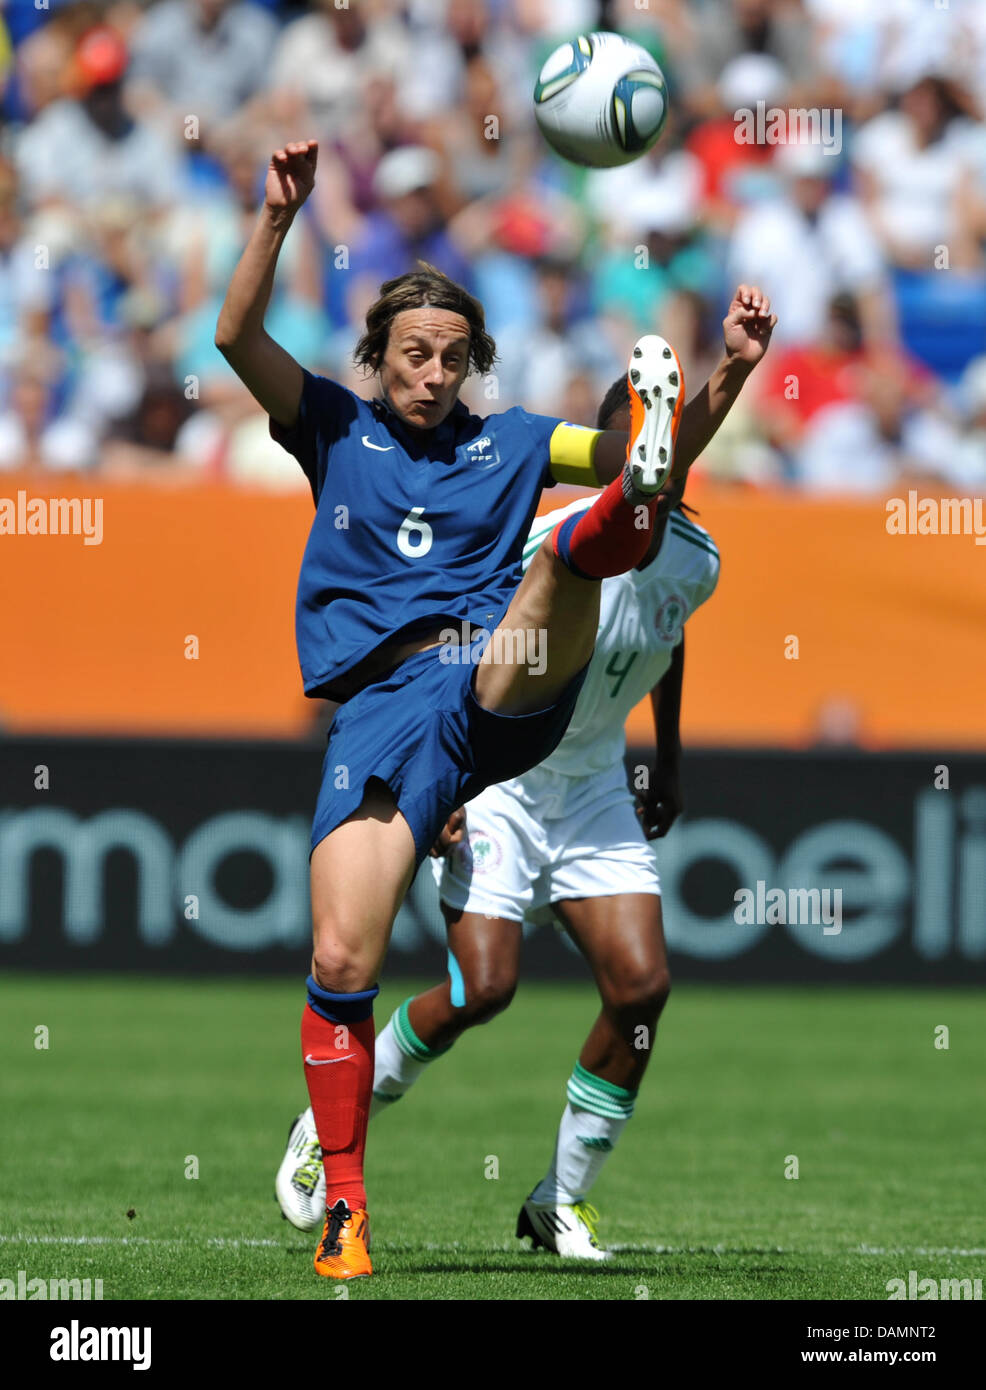 Sandrine Soubeyrand (l) of France and Perpetua Nkwocha of Nigeria fight for the ball during the Group A match Nigeria against France of FIFA Women's World Cup soccer tournament at the Rhein Neckar Arena in Sinsheim, Germany, 26 June 2011. Foto: Arne Dedert dpa/lsw  +++(c) dpa - Bildfunk+++ Stock Photo